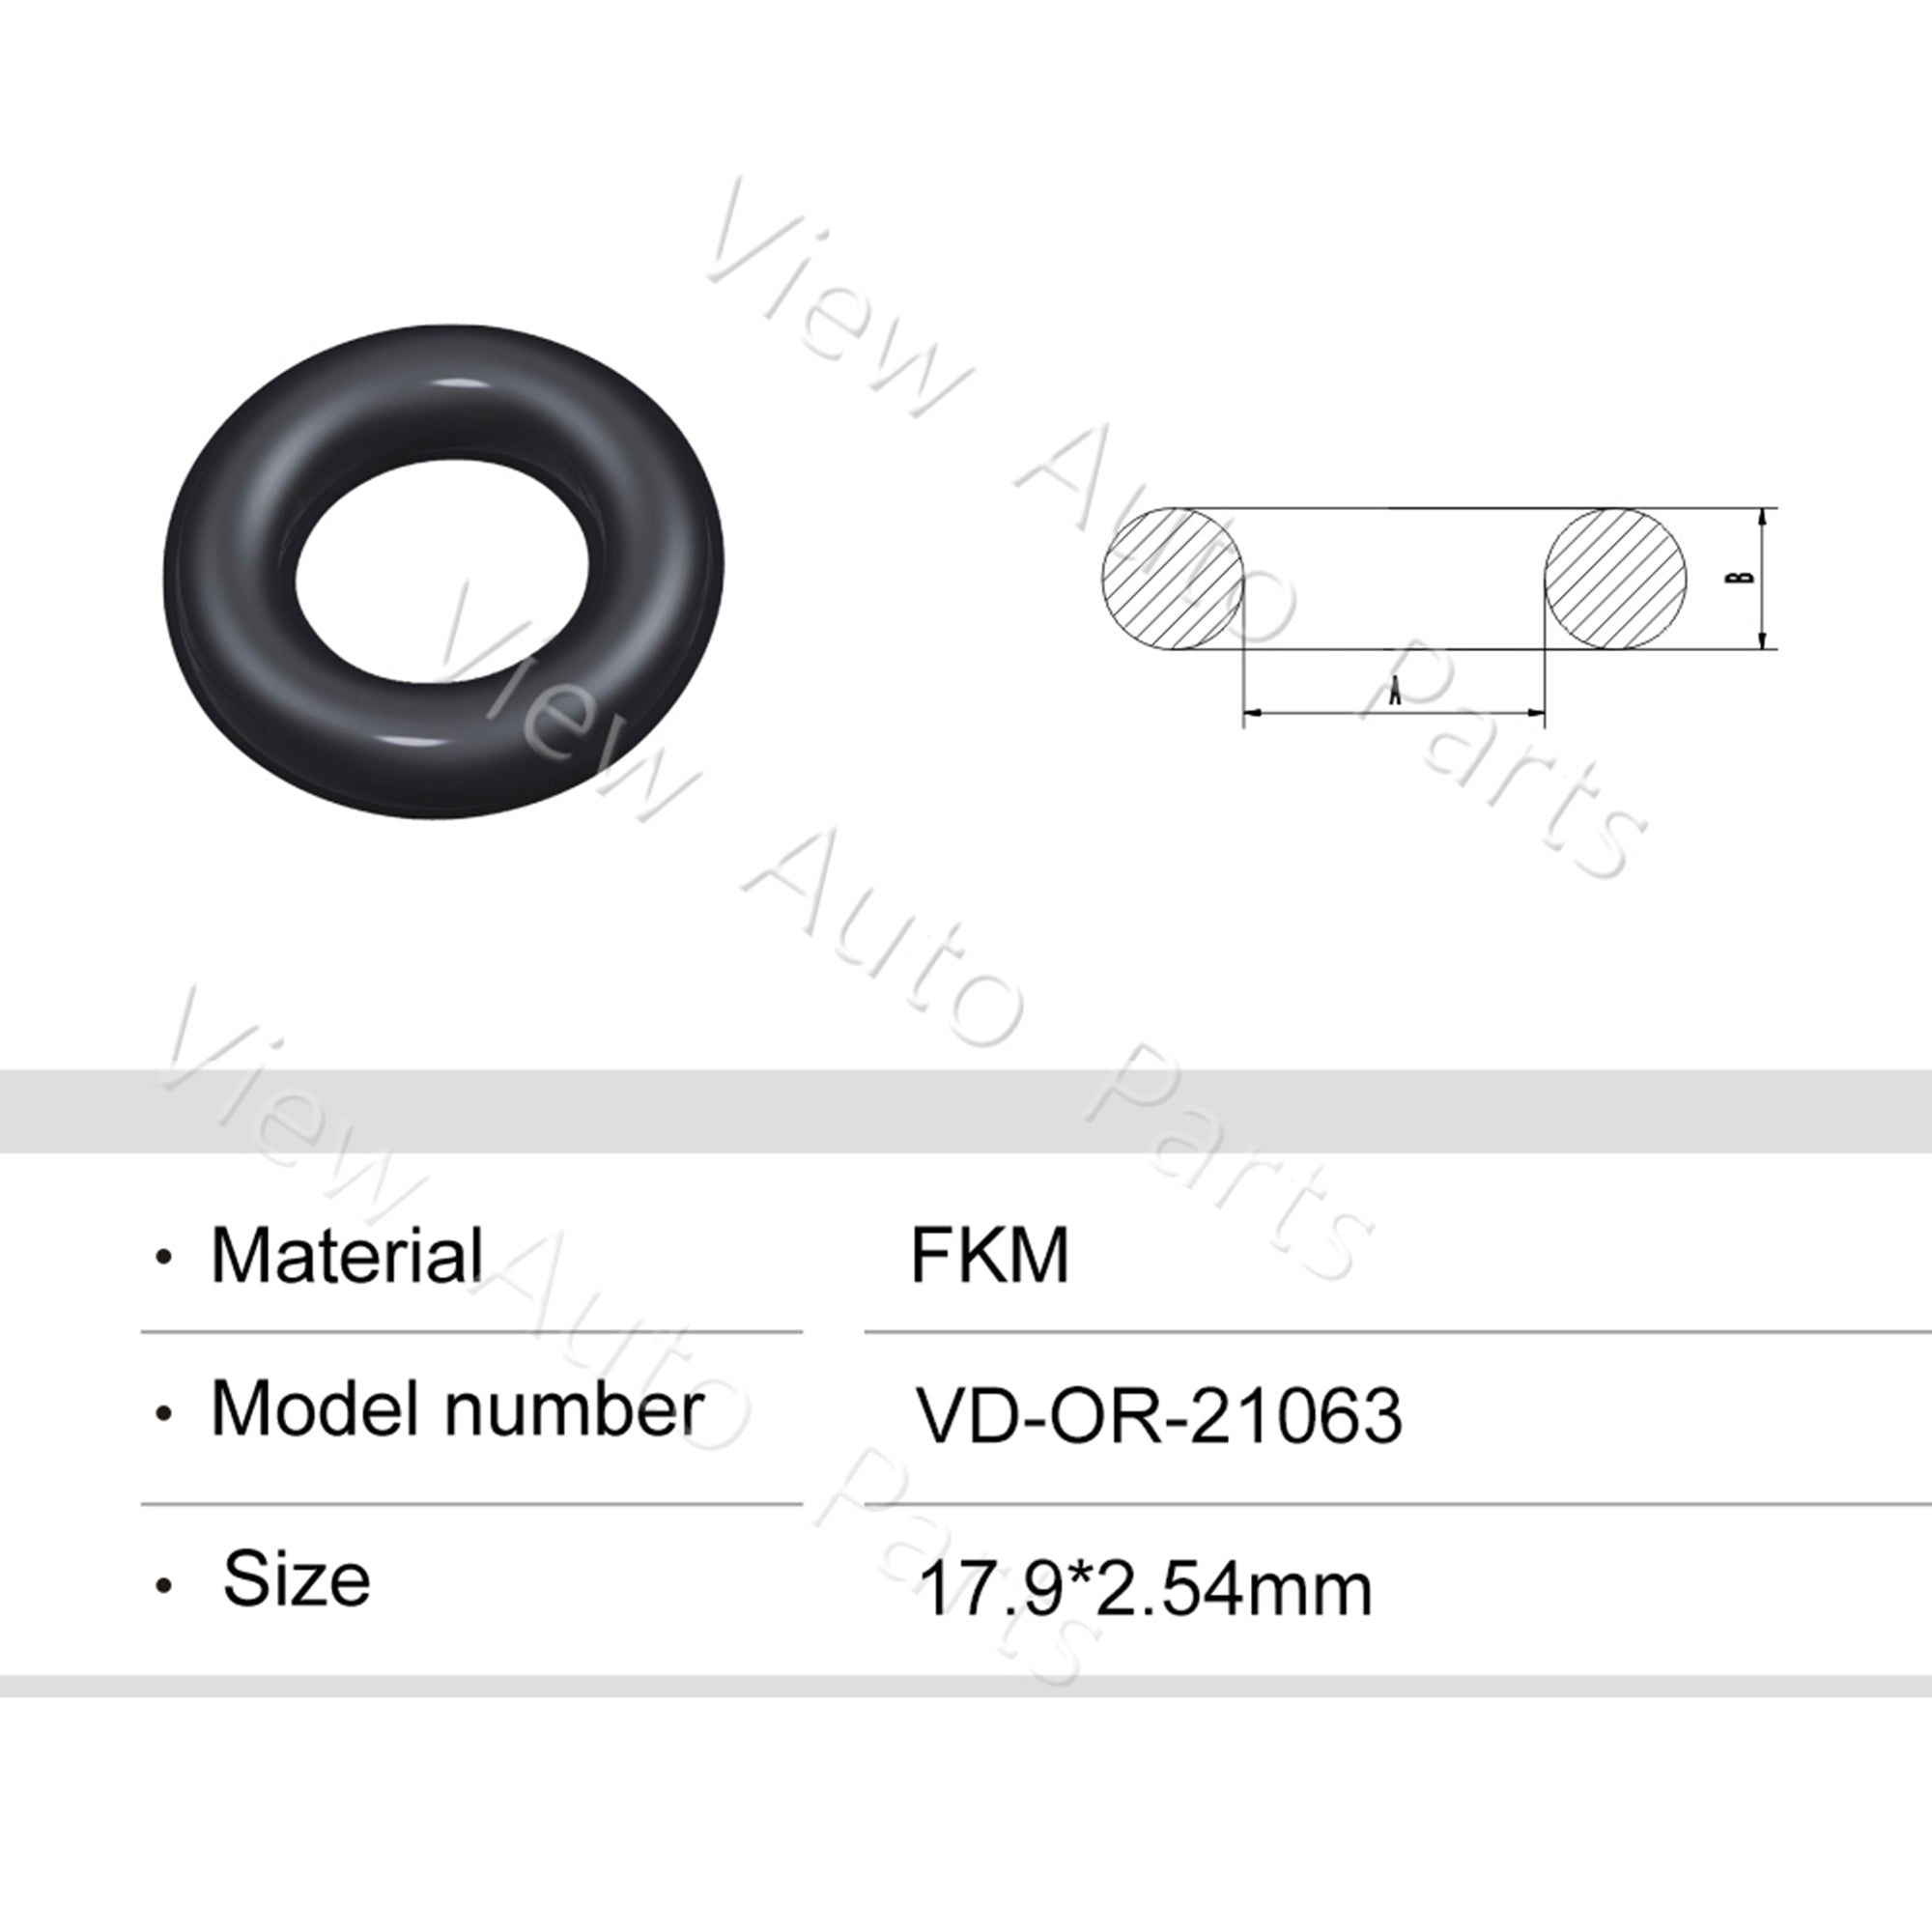 Fuel Injector Rubber Seal Orings for GMC 2.5L Fuel Injector Repair Kits FKM & Rubber Heat Resistant, Size: 17.9*2.54mm OR-21063